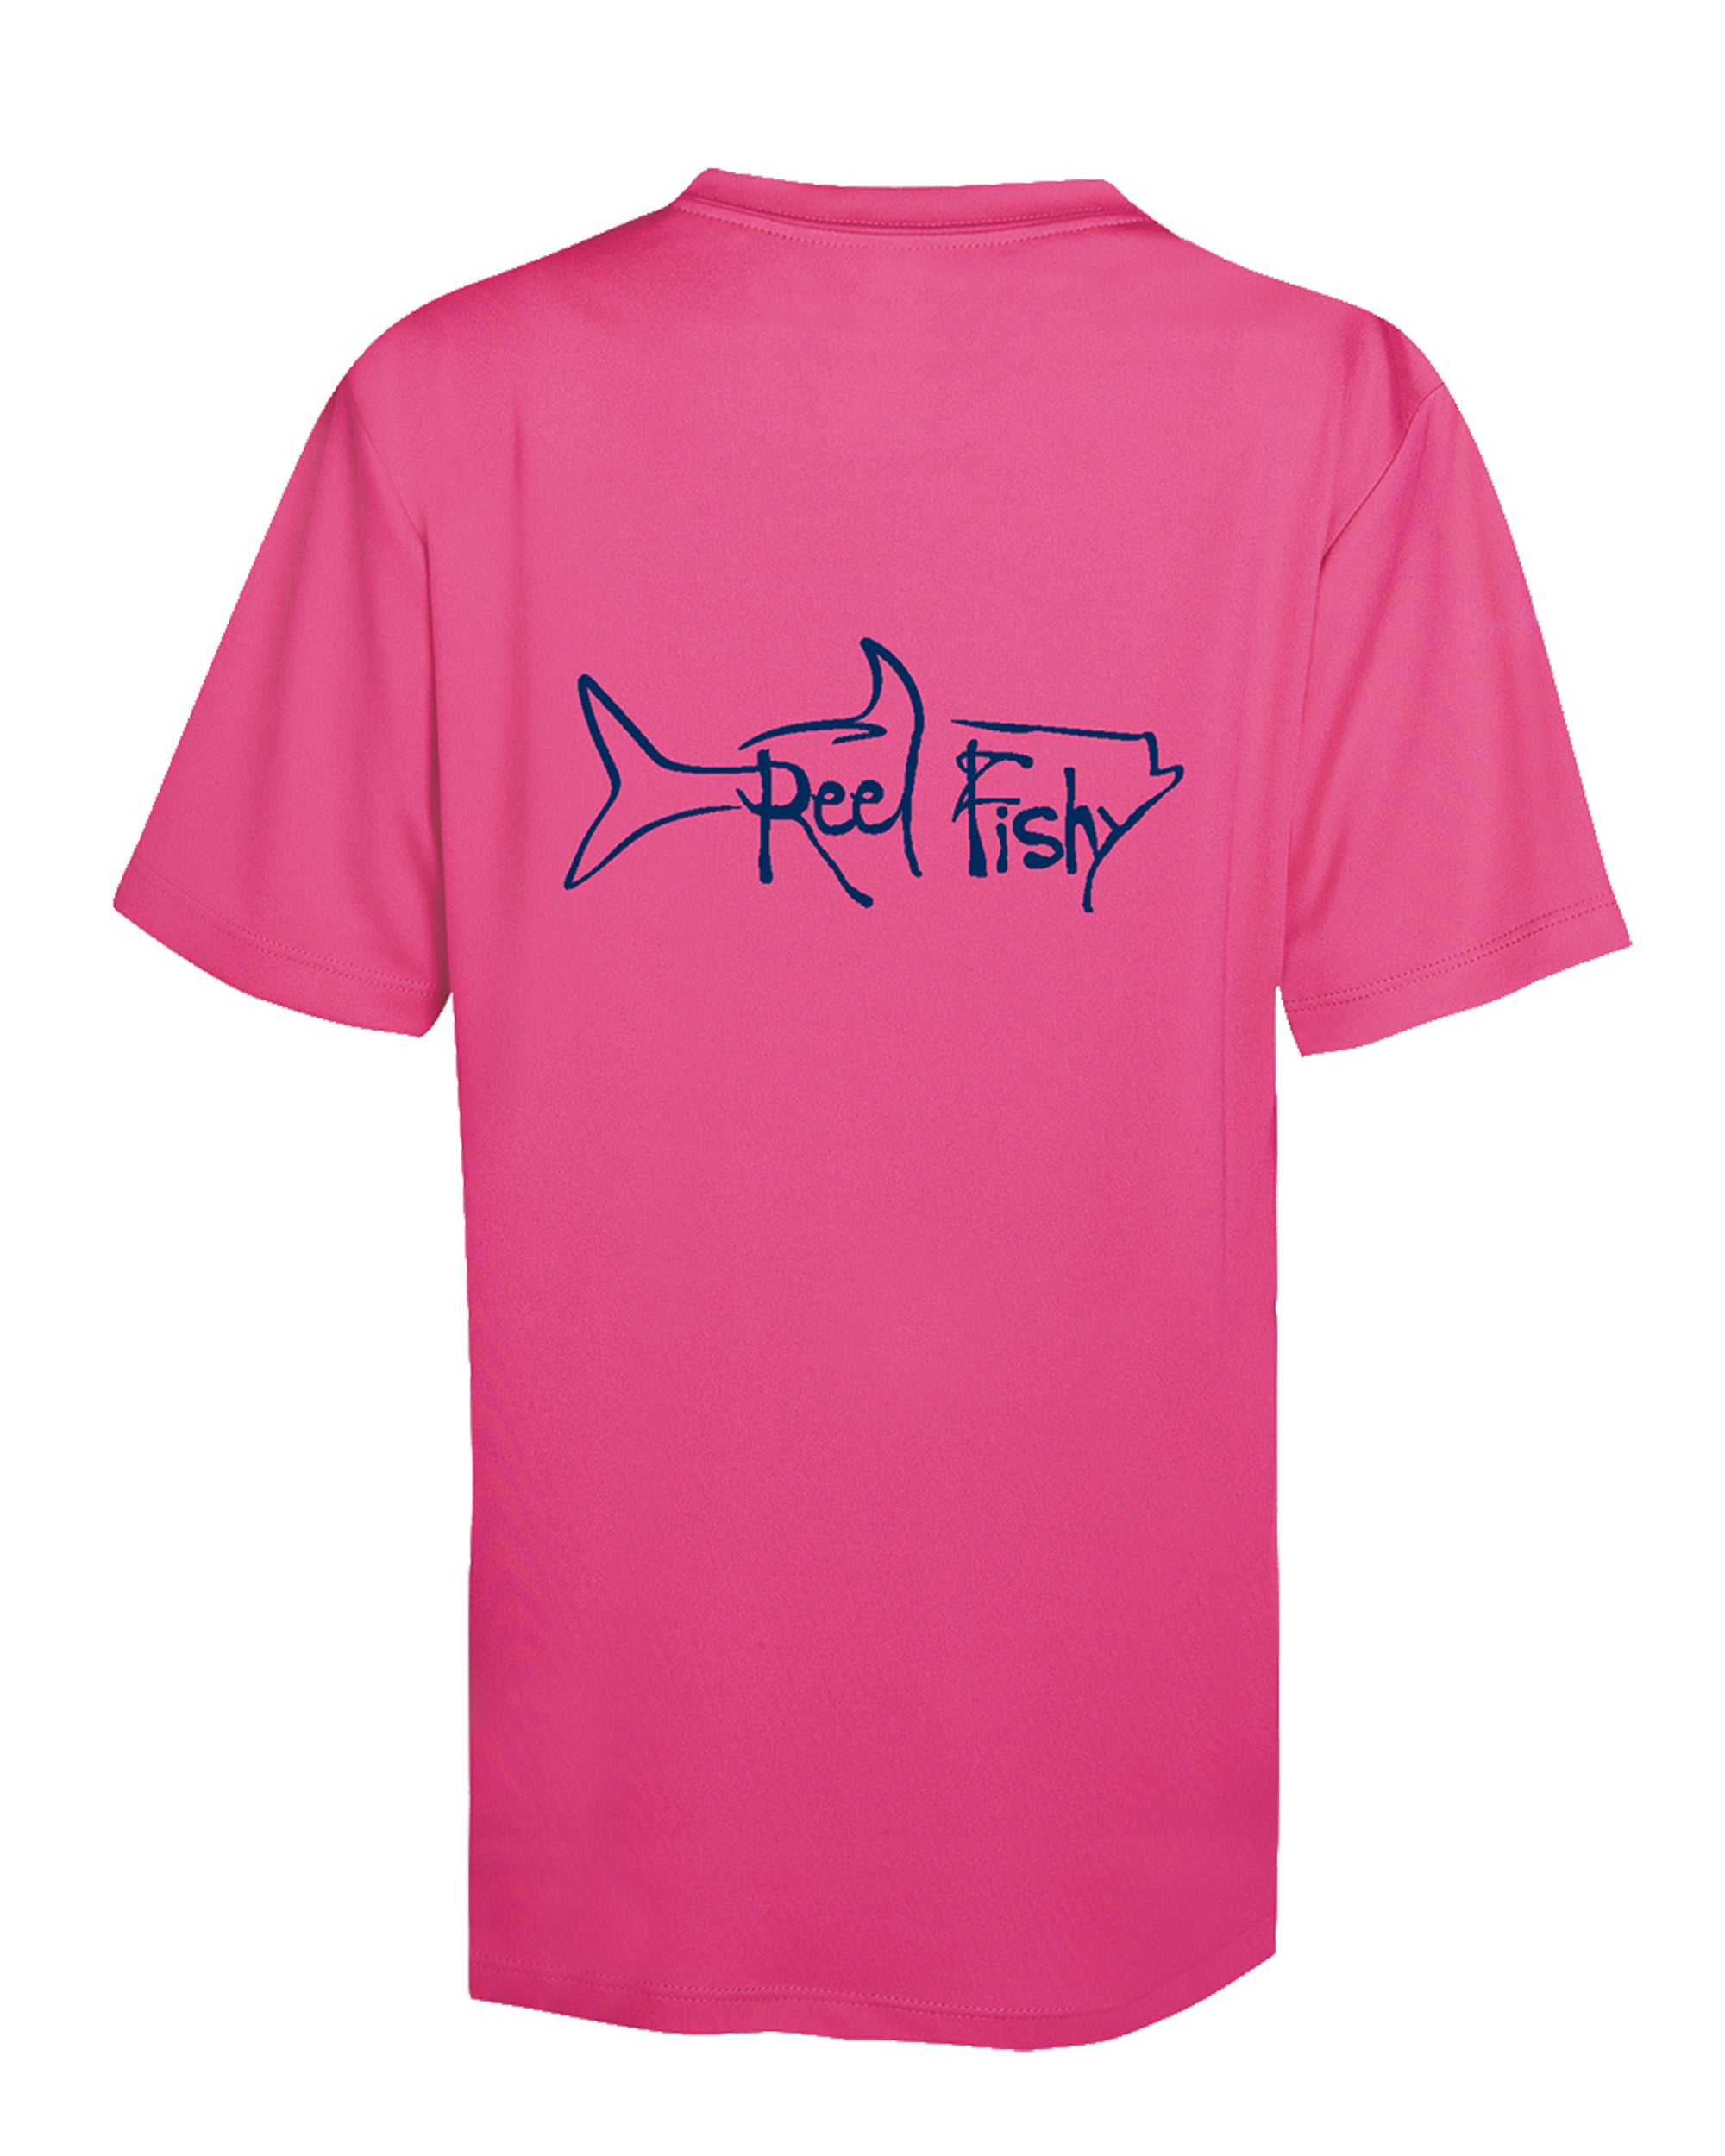 Youth Fishing Cotton T-shirts with Reel Fishy Pirate Skull & Salt Fishing Rods Logo 18M / Candy Pink